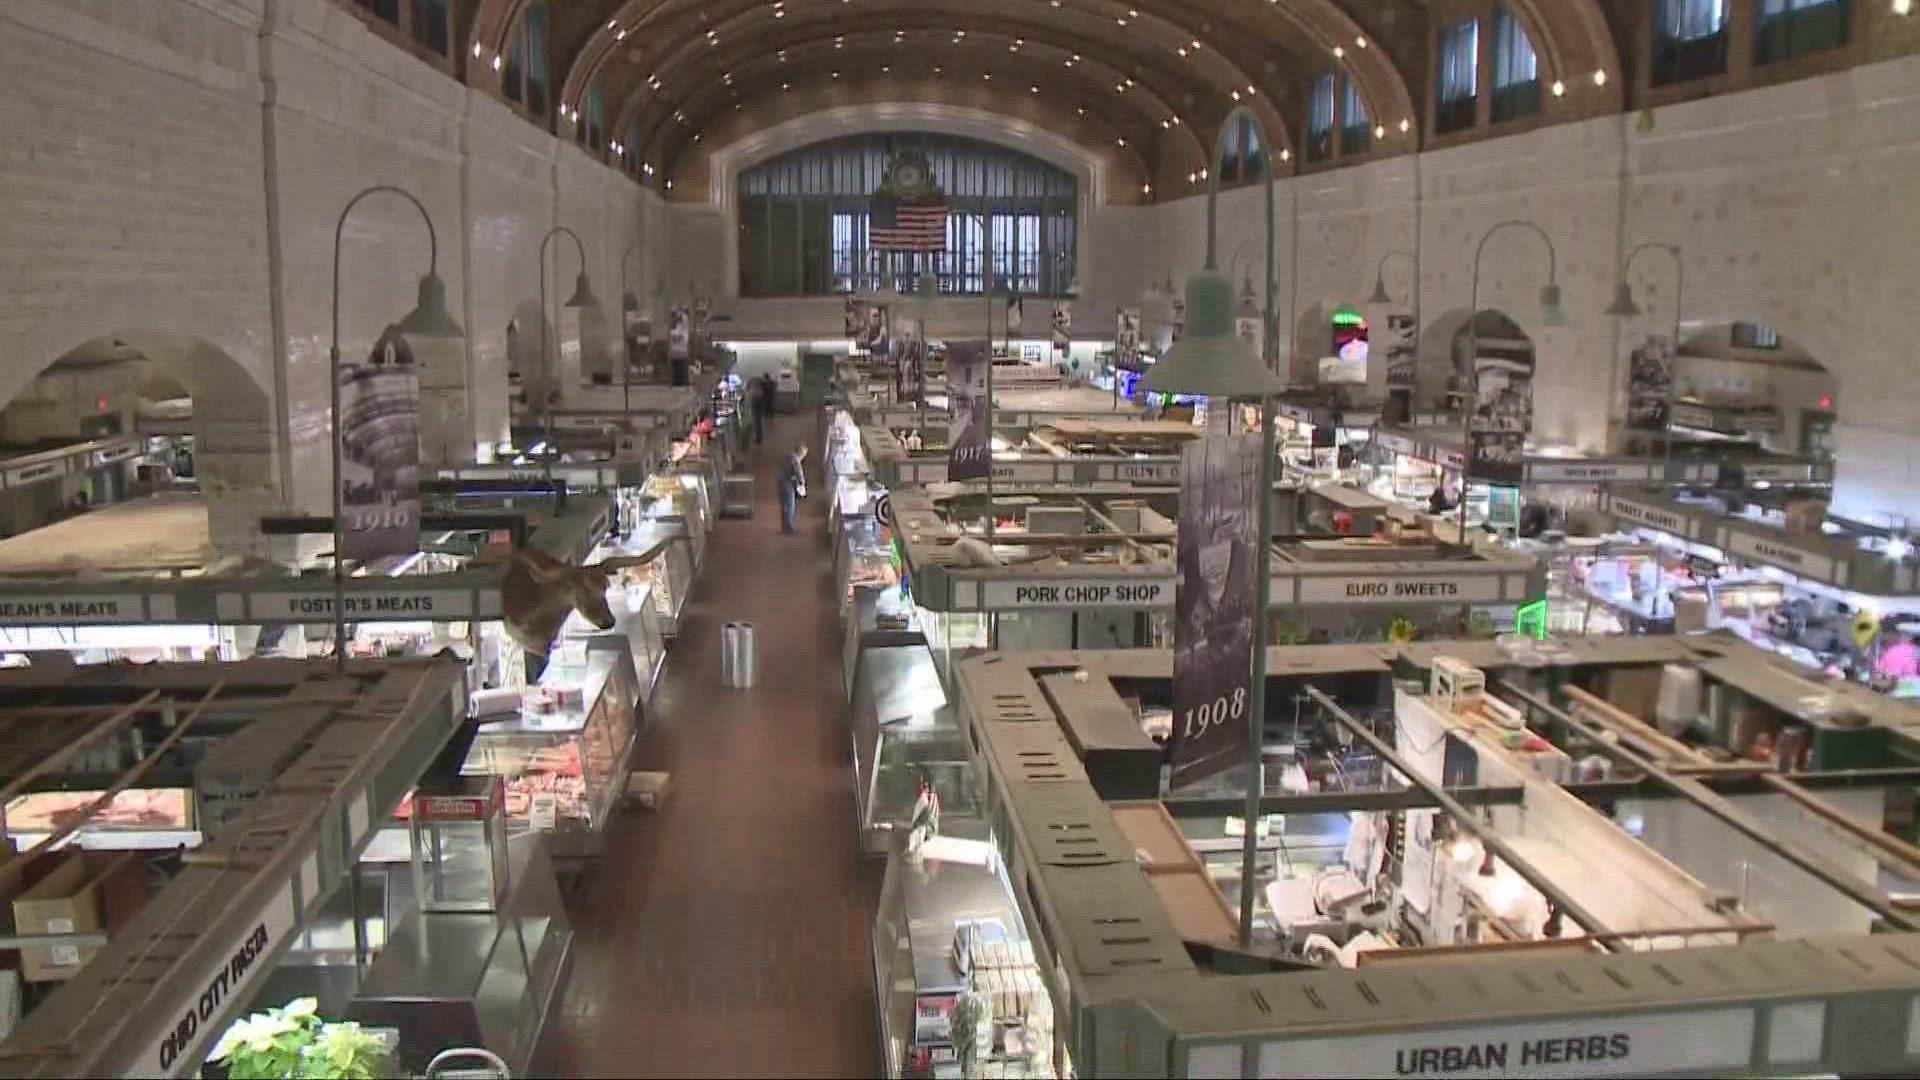 For the past 110 years, the West Side Market has been a staple in Cleveland. Vendors are hoping that the future will bring needed improvements to the landmark.